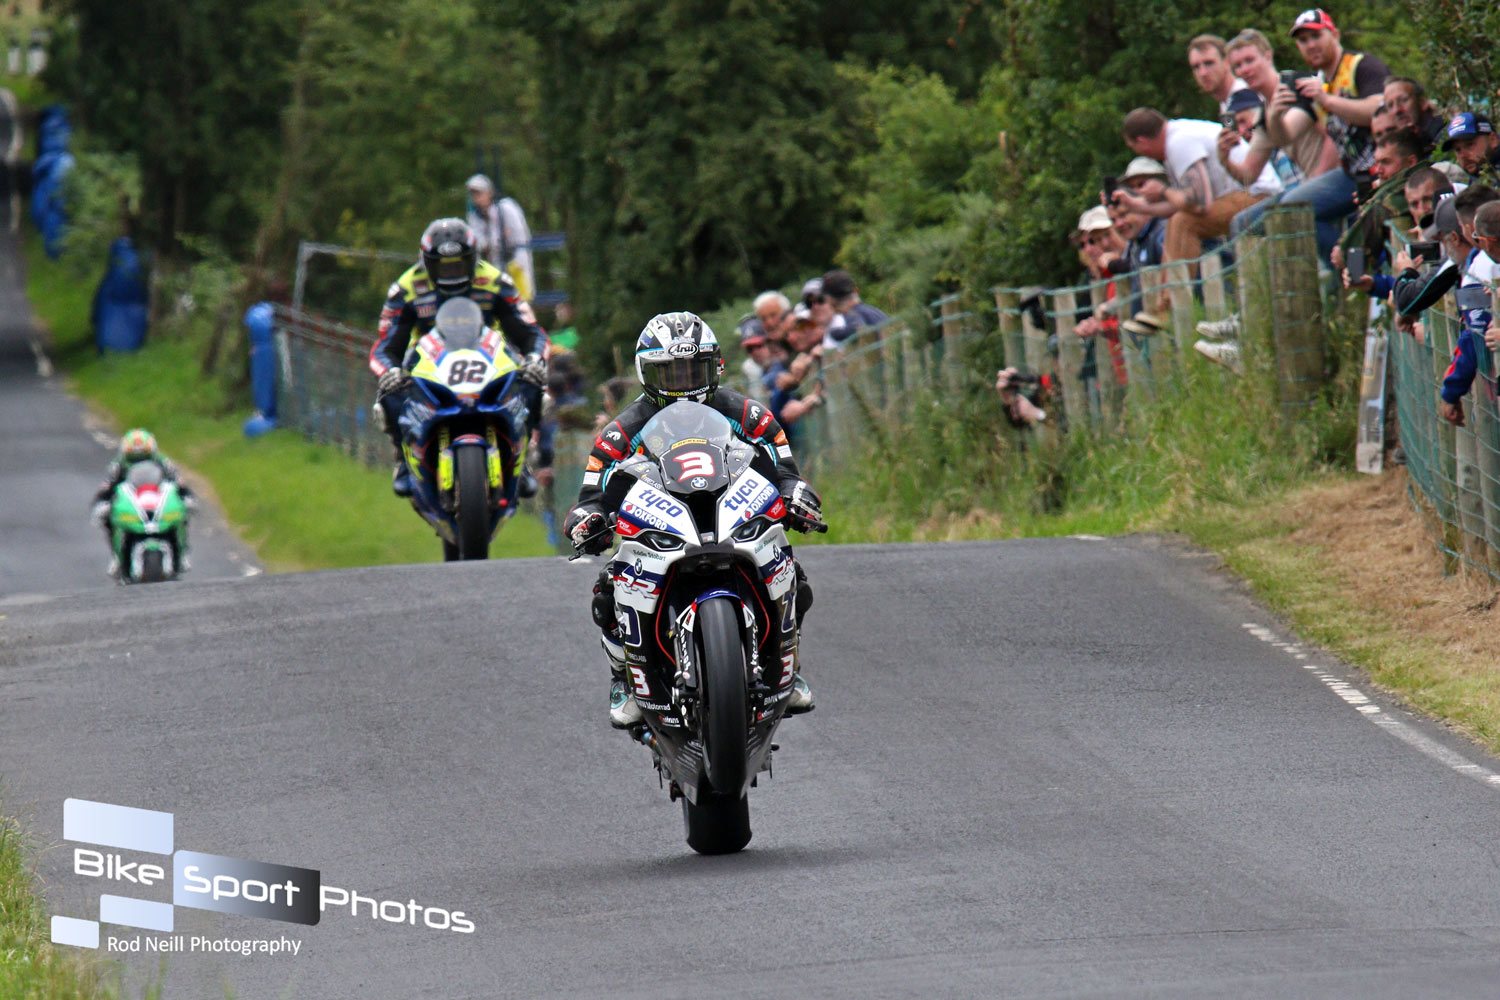 Armoy: Eighth Race Of Legends Crown For Impossible Making Possible Maker Dunlop